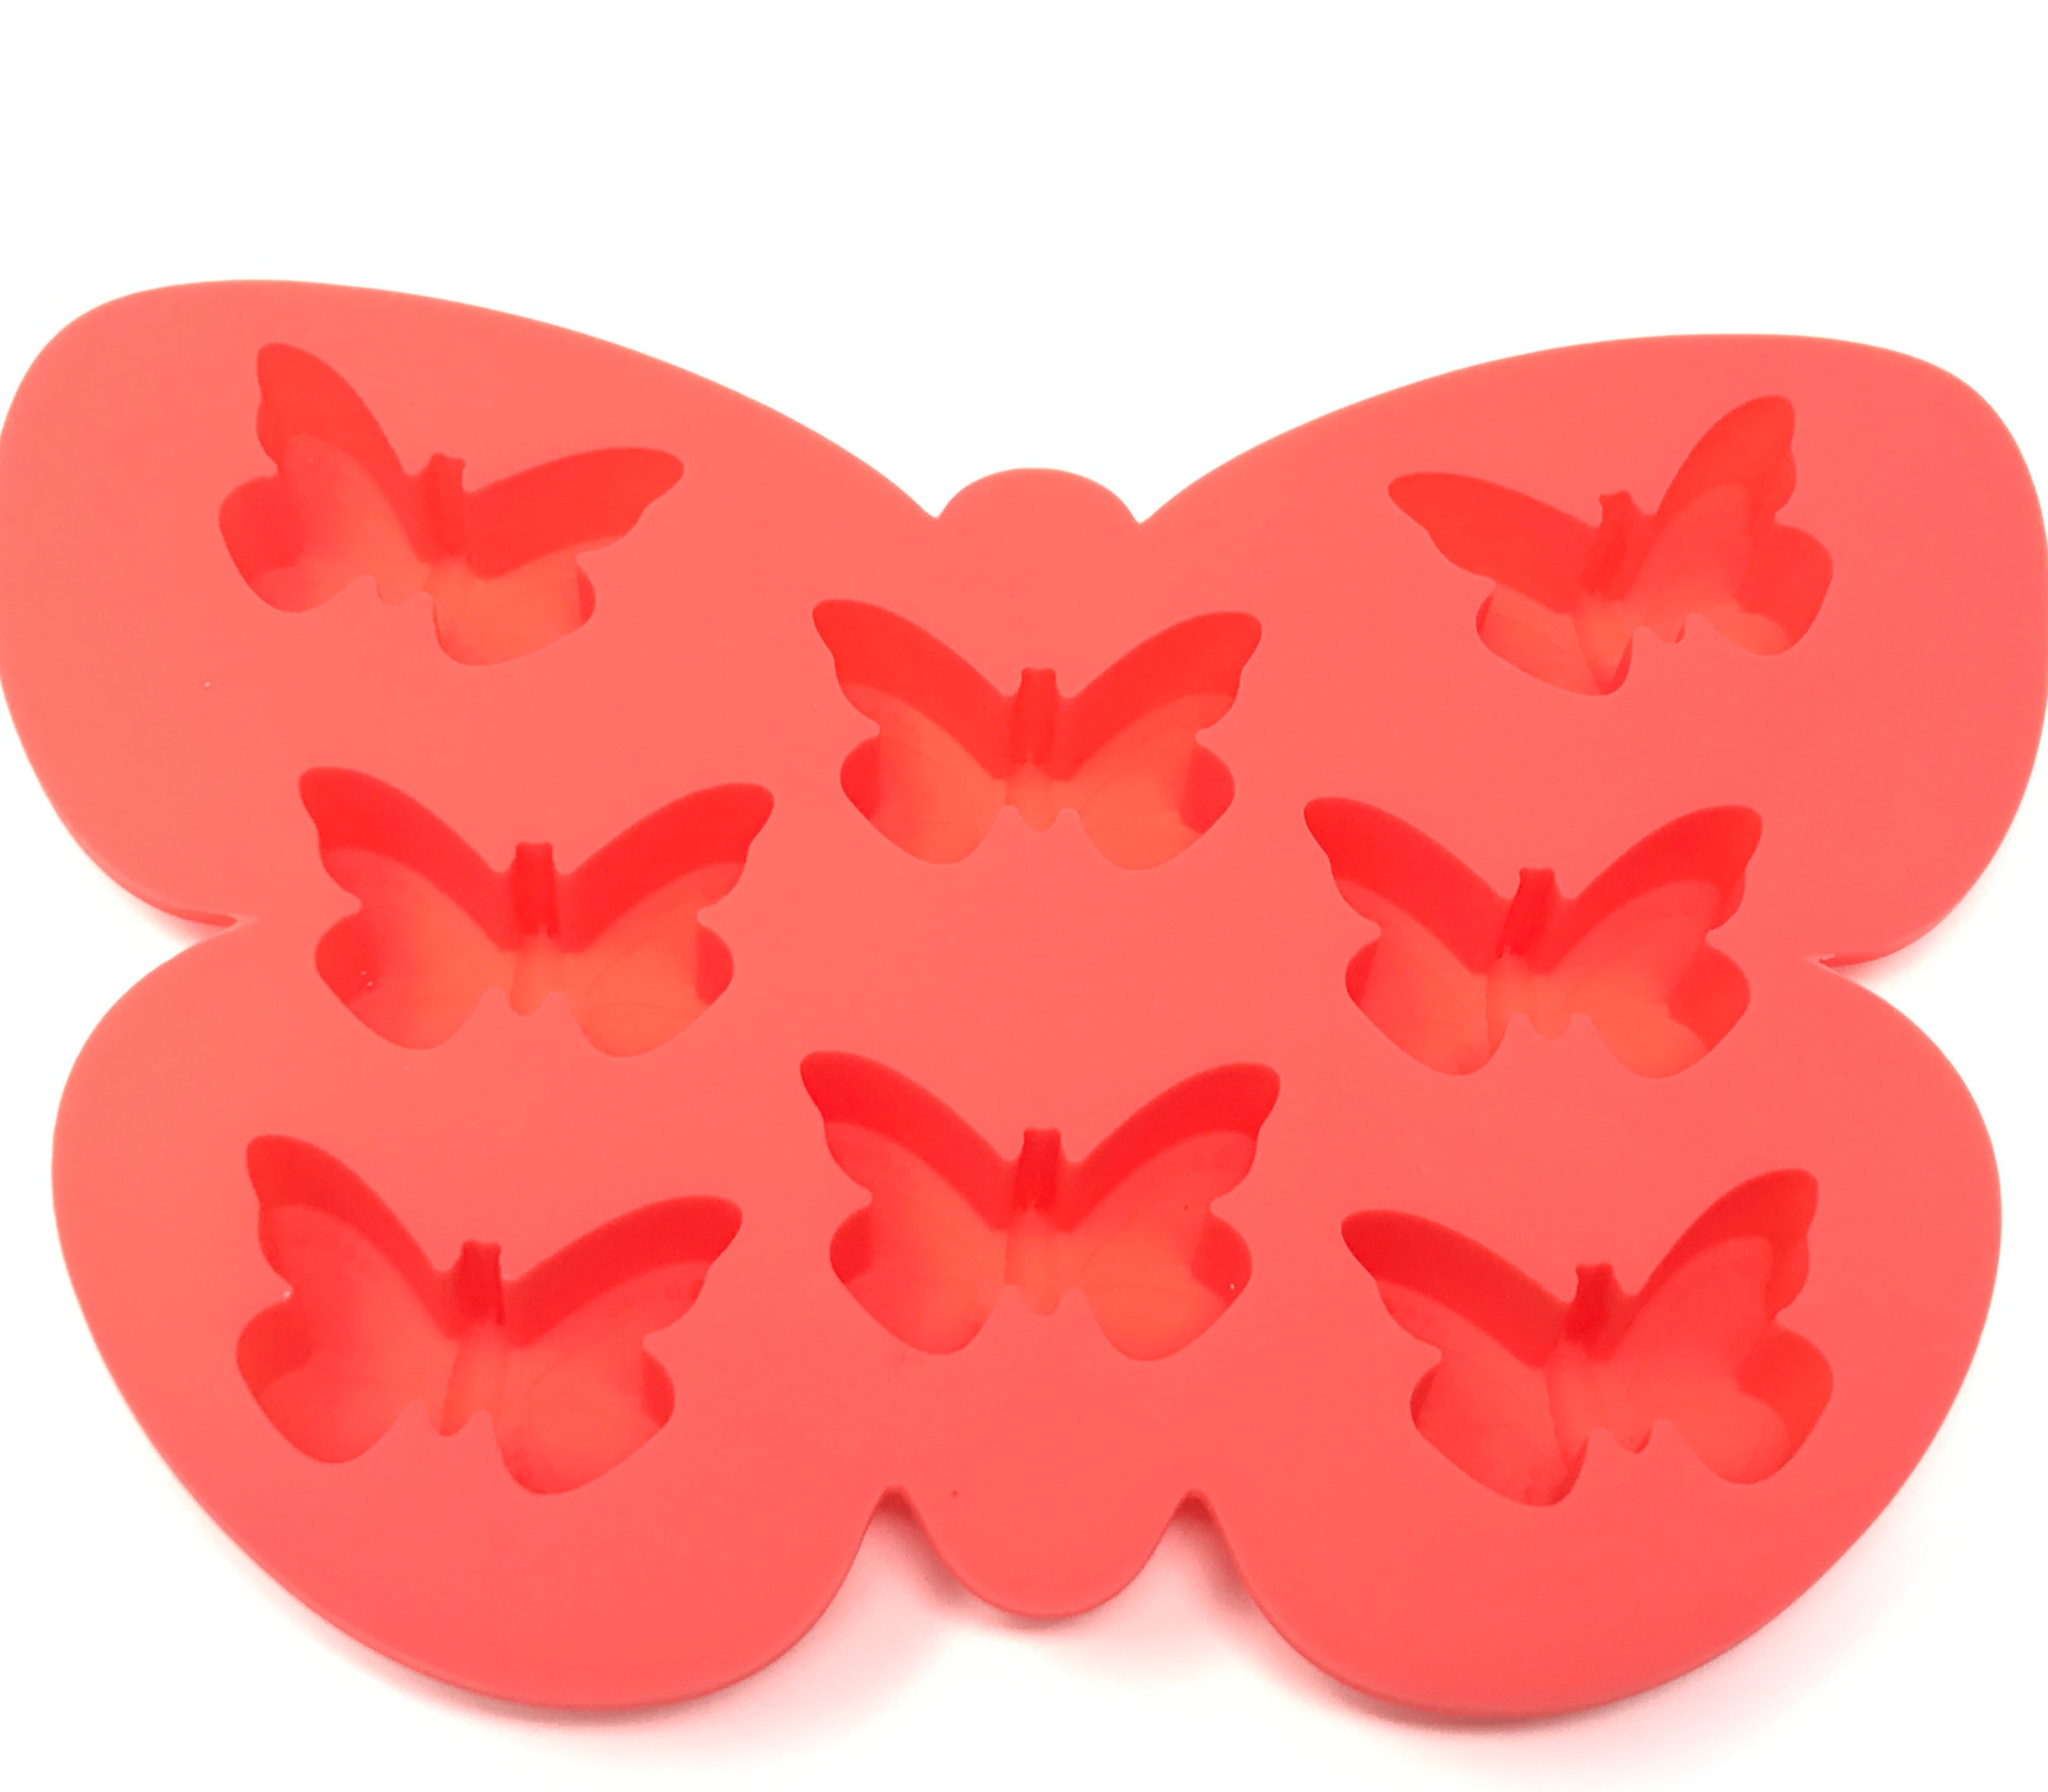 BusyPet Butterfly Ice Cube Tray (2 Pcs) Craft Ice Cube Molds Butterfly Molds Silicone Ice Cube Tray Shapes Butterfly Molds for Chocolate Cute Ice Cube Tray